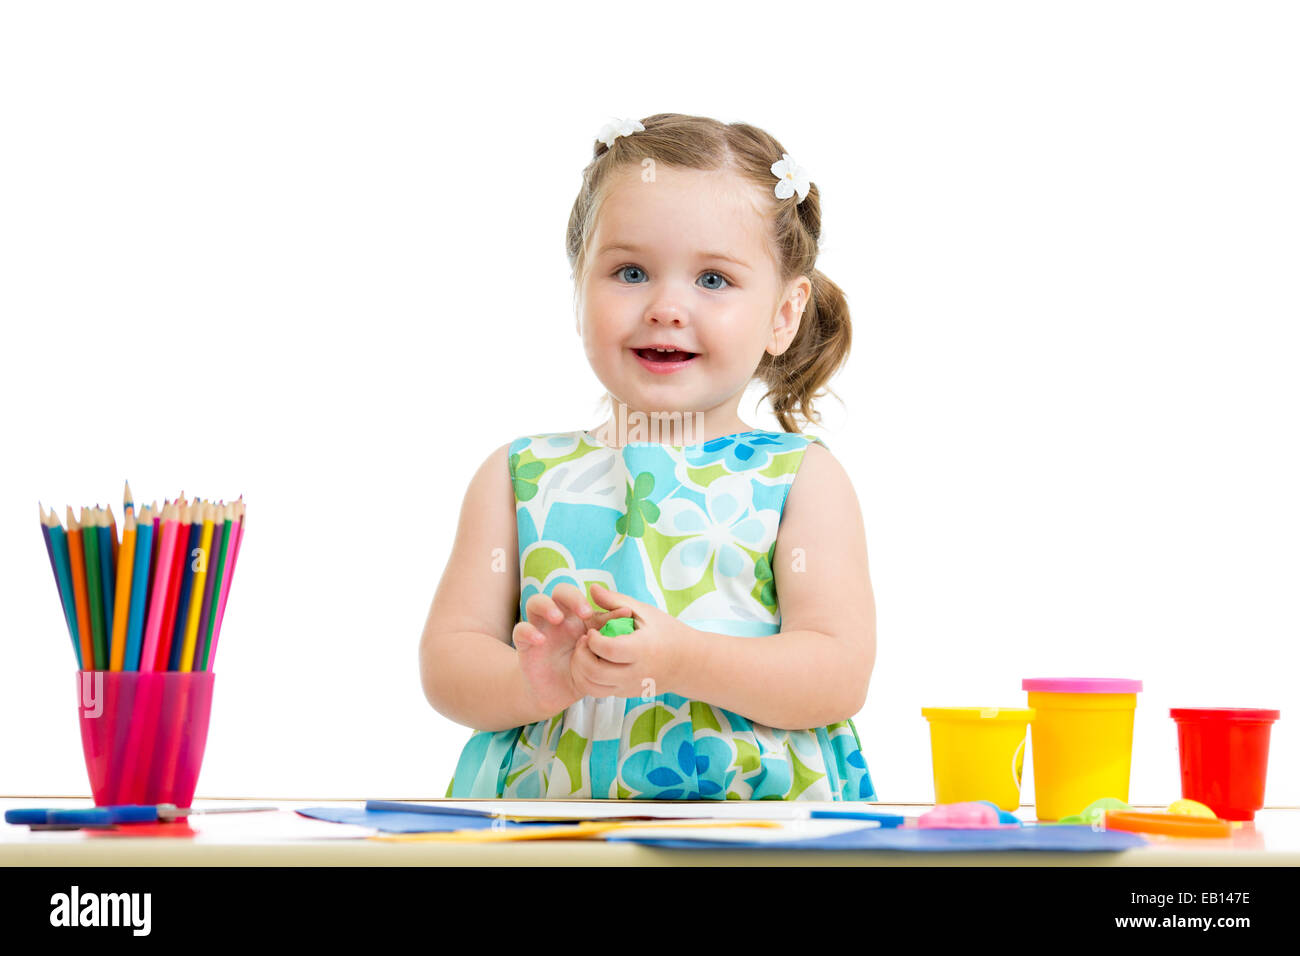 lovely girl drawing with colorful pencils Stock Photo